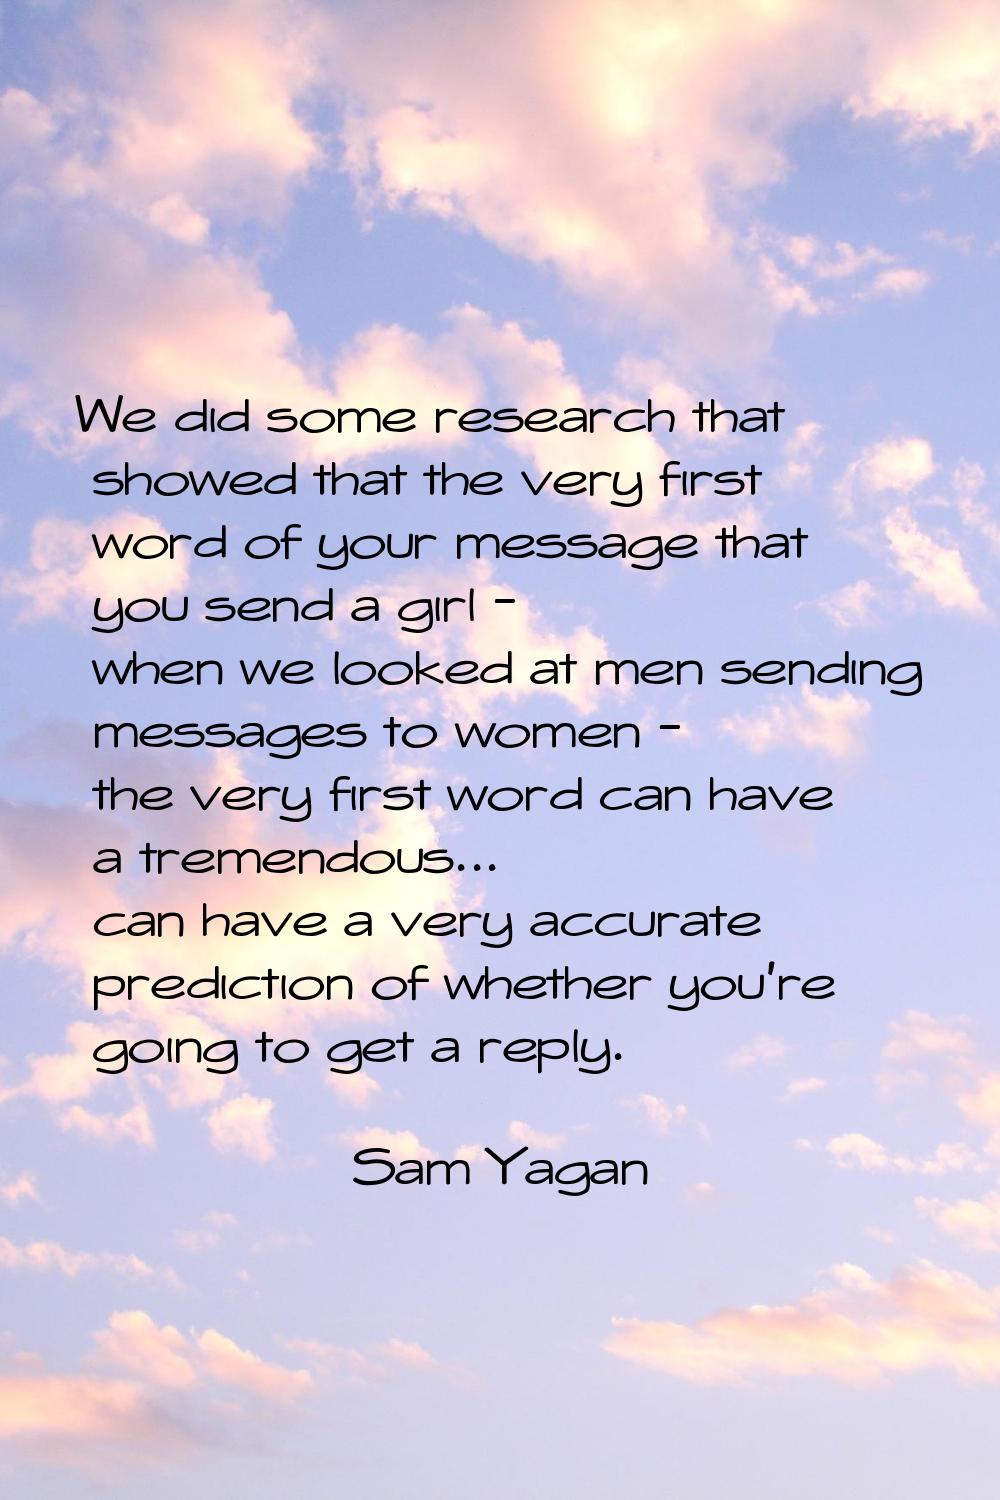 We did some research that showed that the very first word of your message that you send a girl - wh